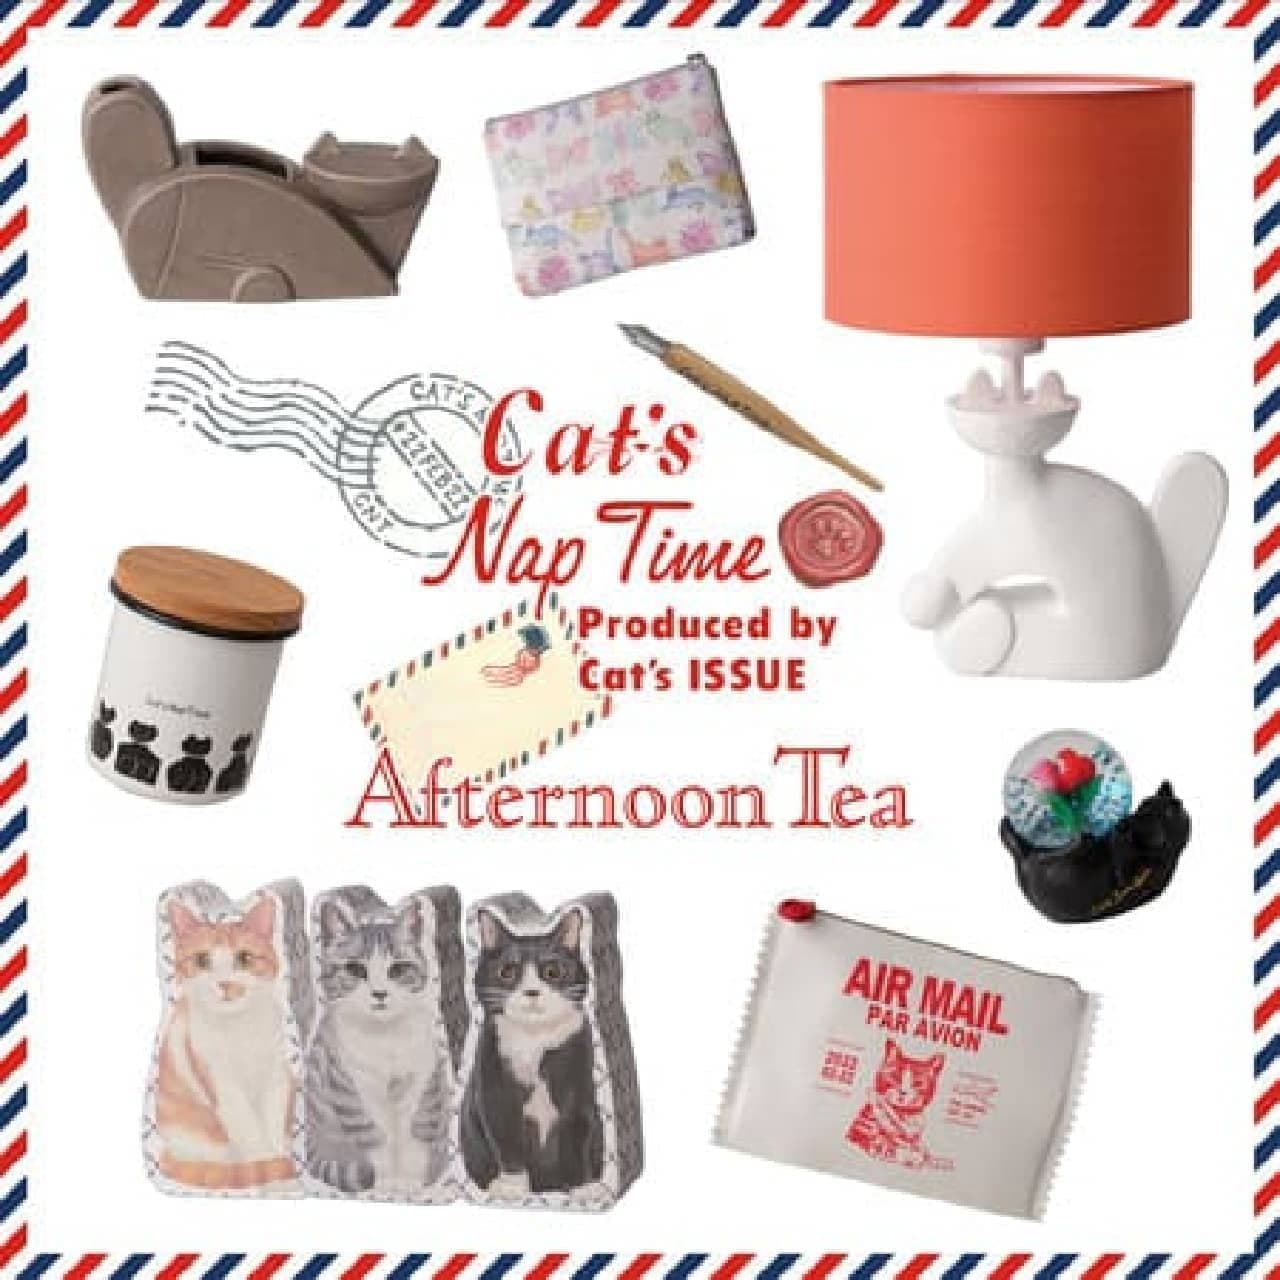 Afternoon Tea LIVING「Cat's NapTime produced by Cat's ISSUE」ネコ好きクリエイターの雑貨いろいろ！収益一部は寄付